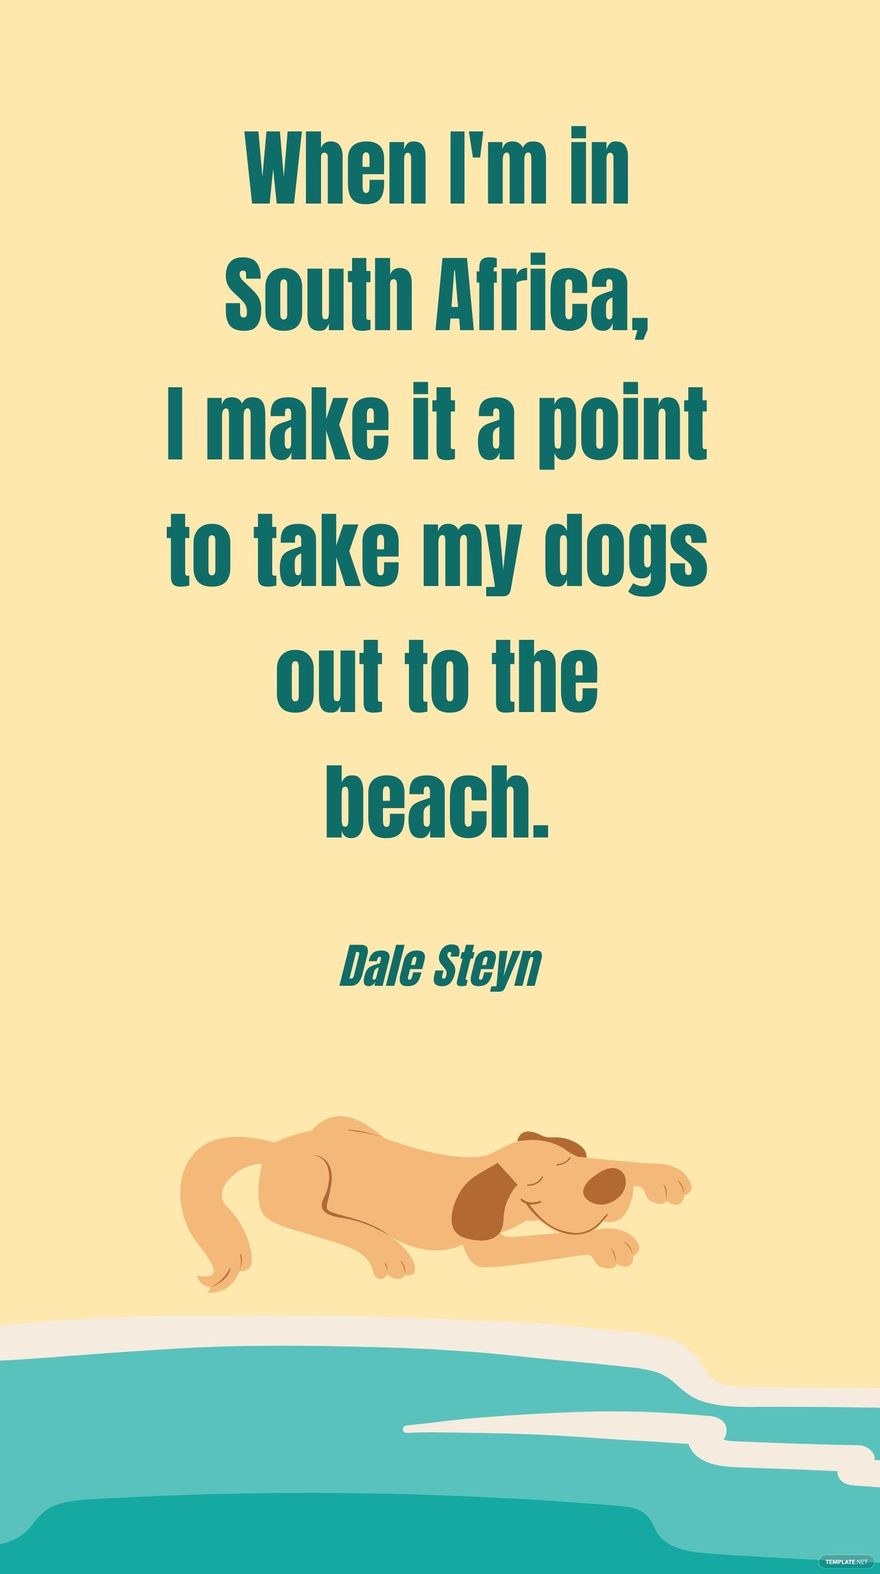 Dale Steyn - When I'm in South Africa, I make it a point to take my dogs out to the beach.